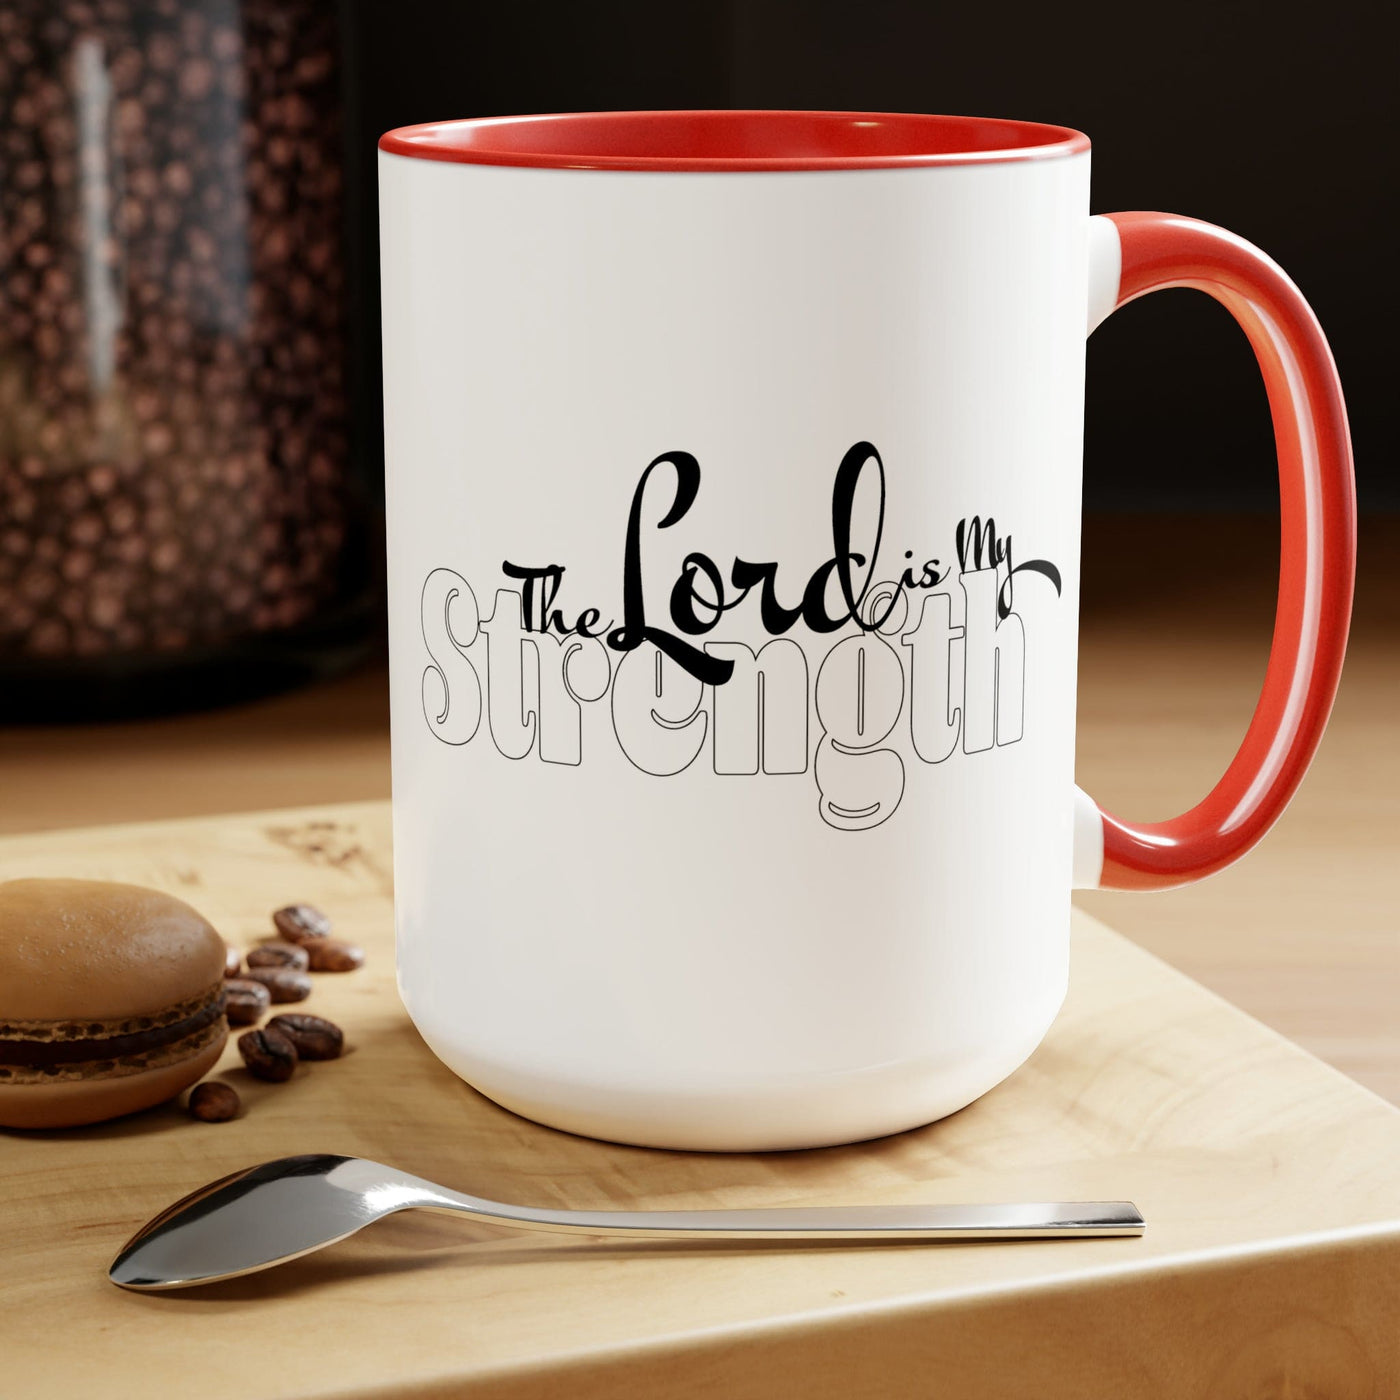 Accent Ceramic Coffee Mug 15oz - The Lord Is My Strength Black And White